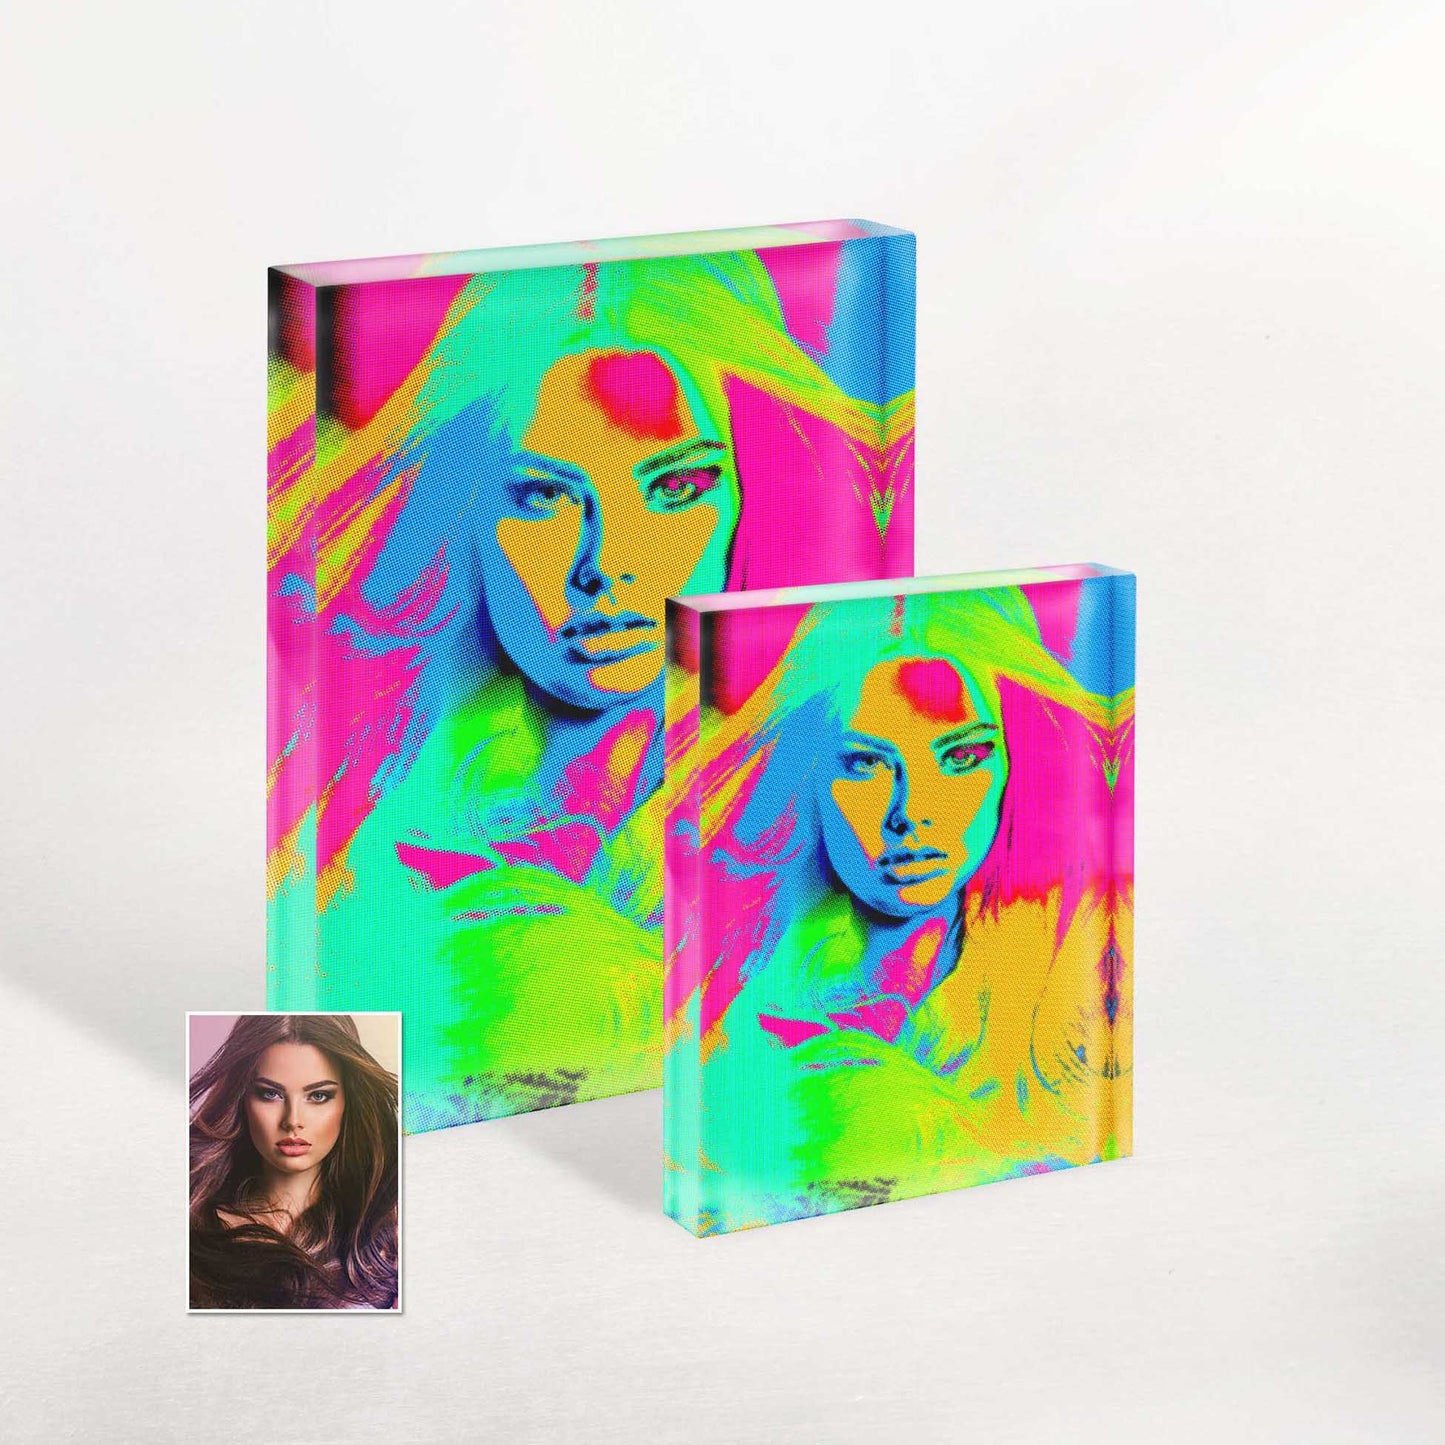 Infuse your space with the captivating energy of the Personalised Pop Art Acrylic Block Photo. Its bright and vibrant design radiates fun and excitement, serving as a cool and energetic birthday or anniversary gift